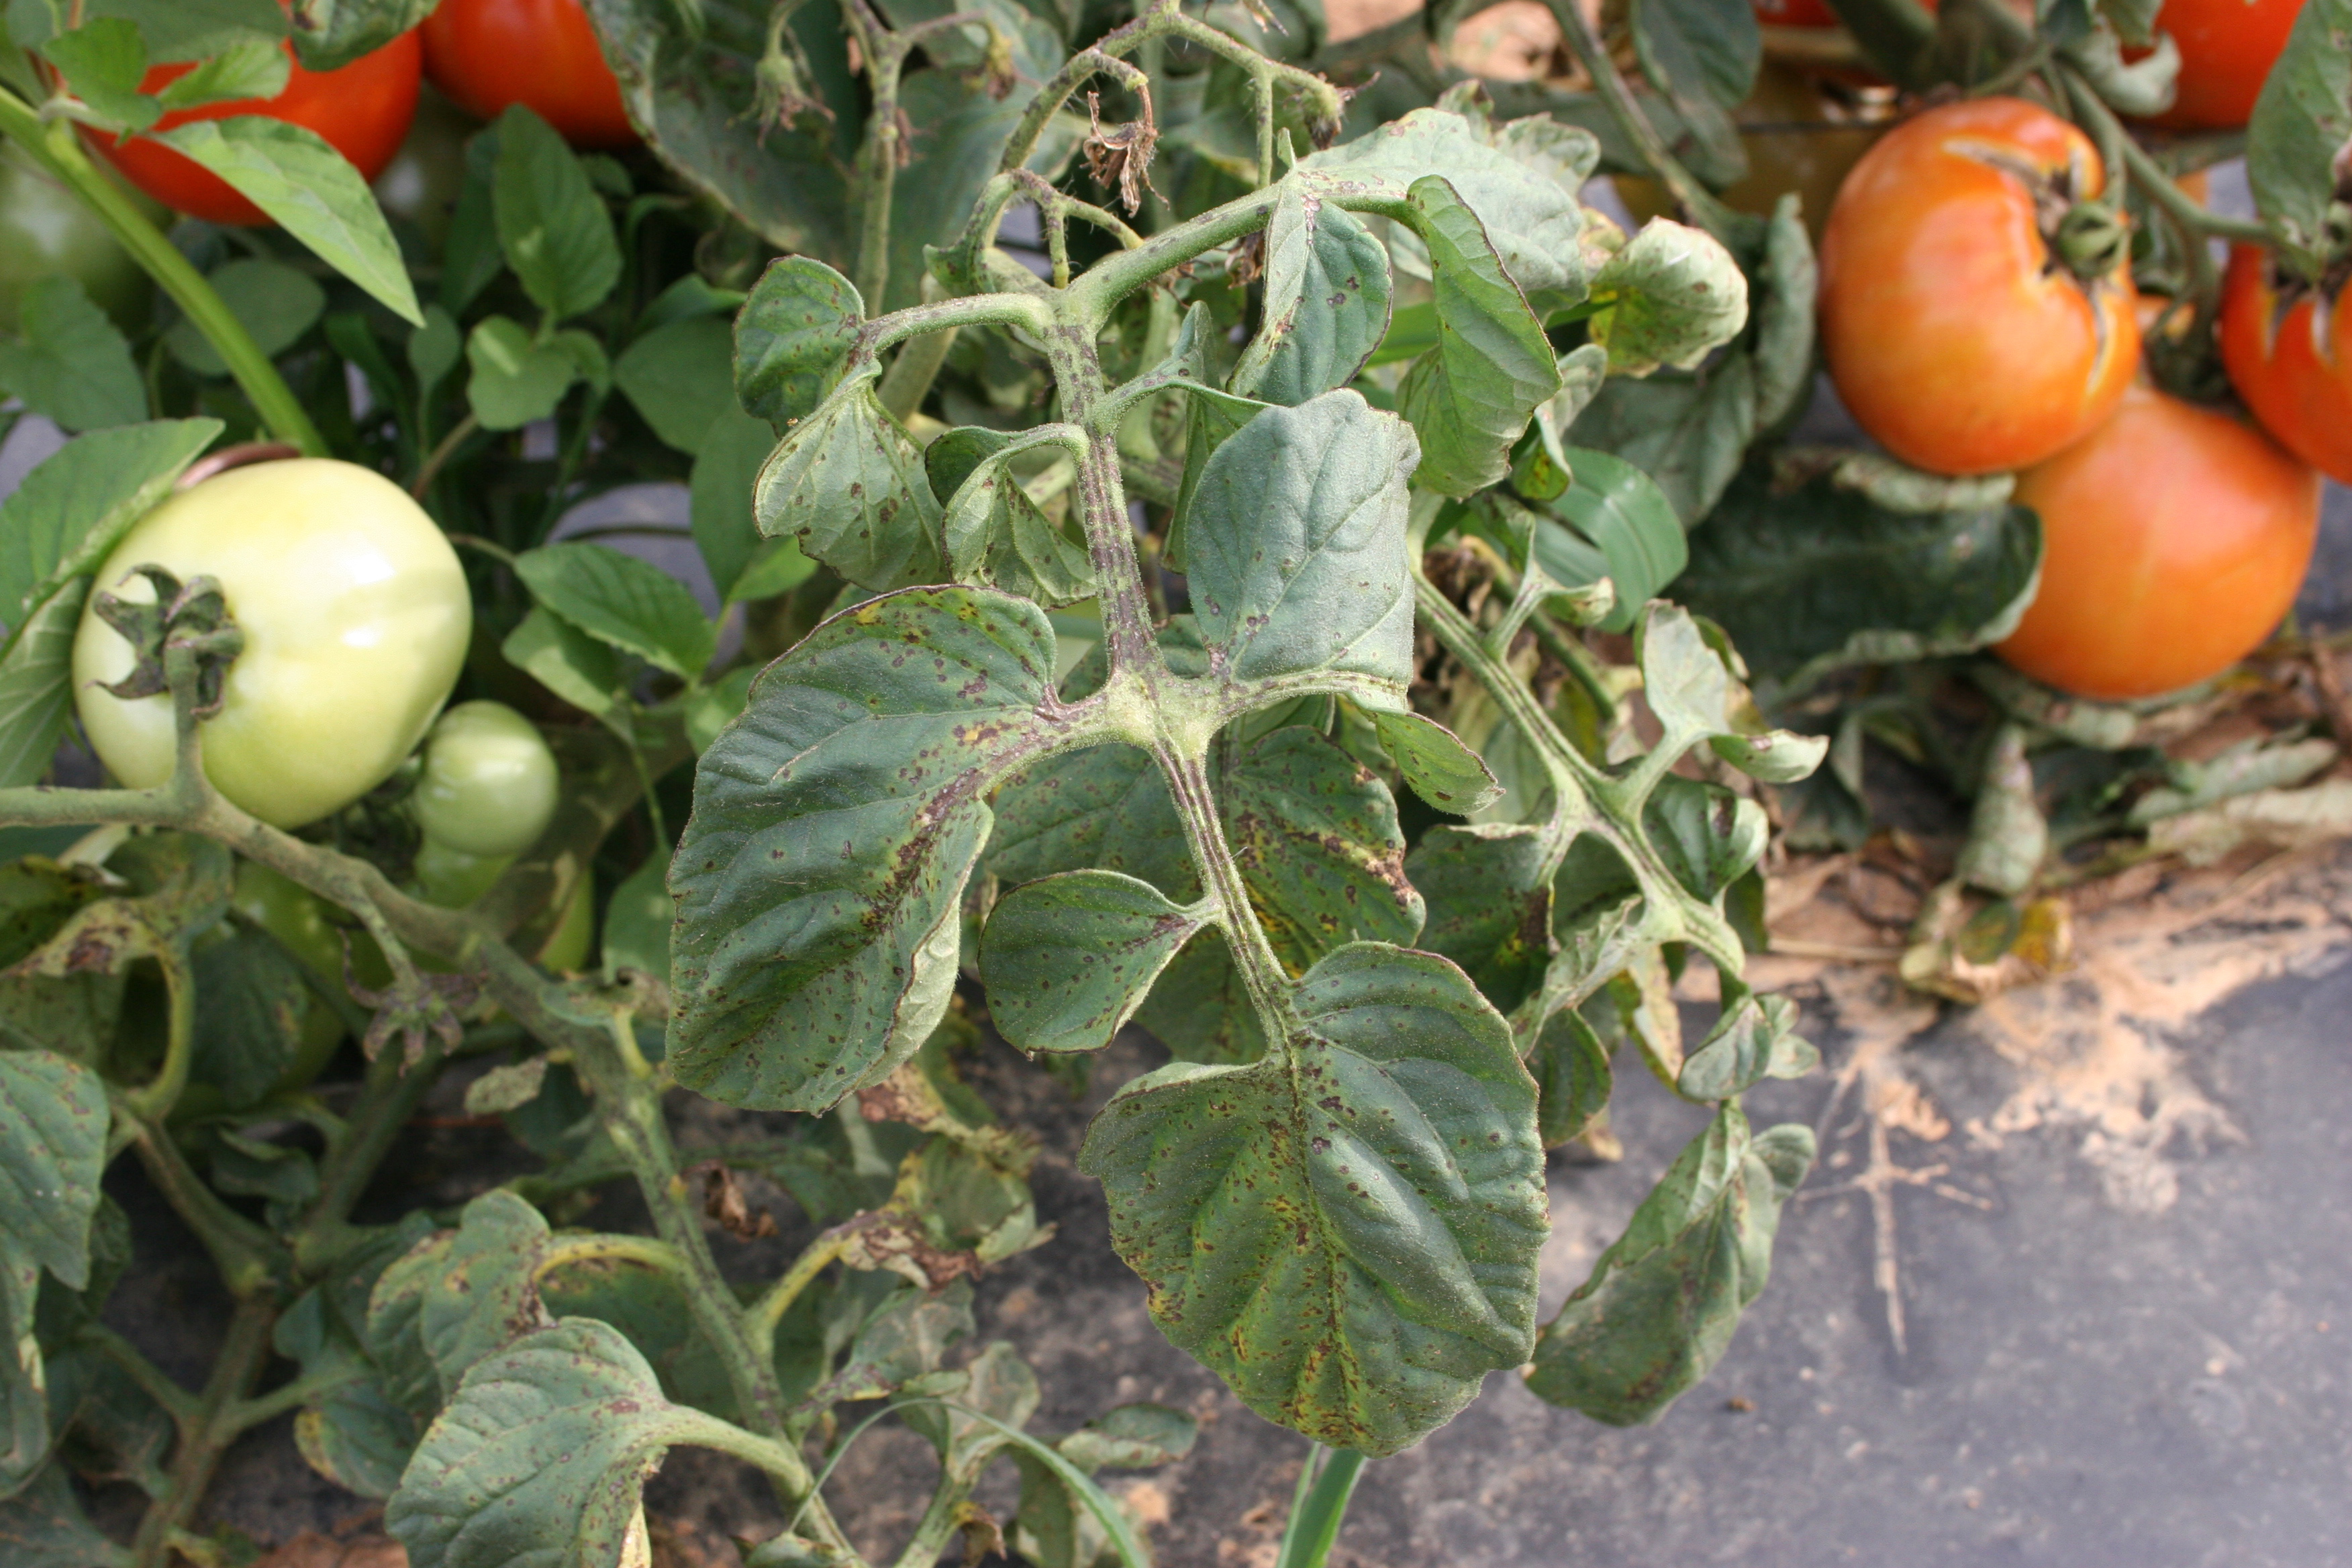 Bacterial spot on tomato foliage.